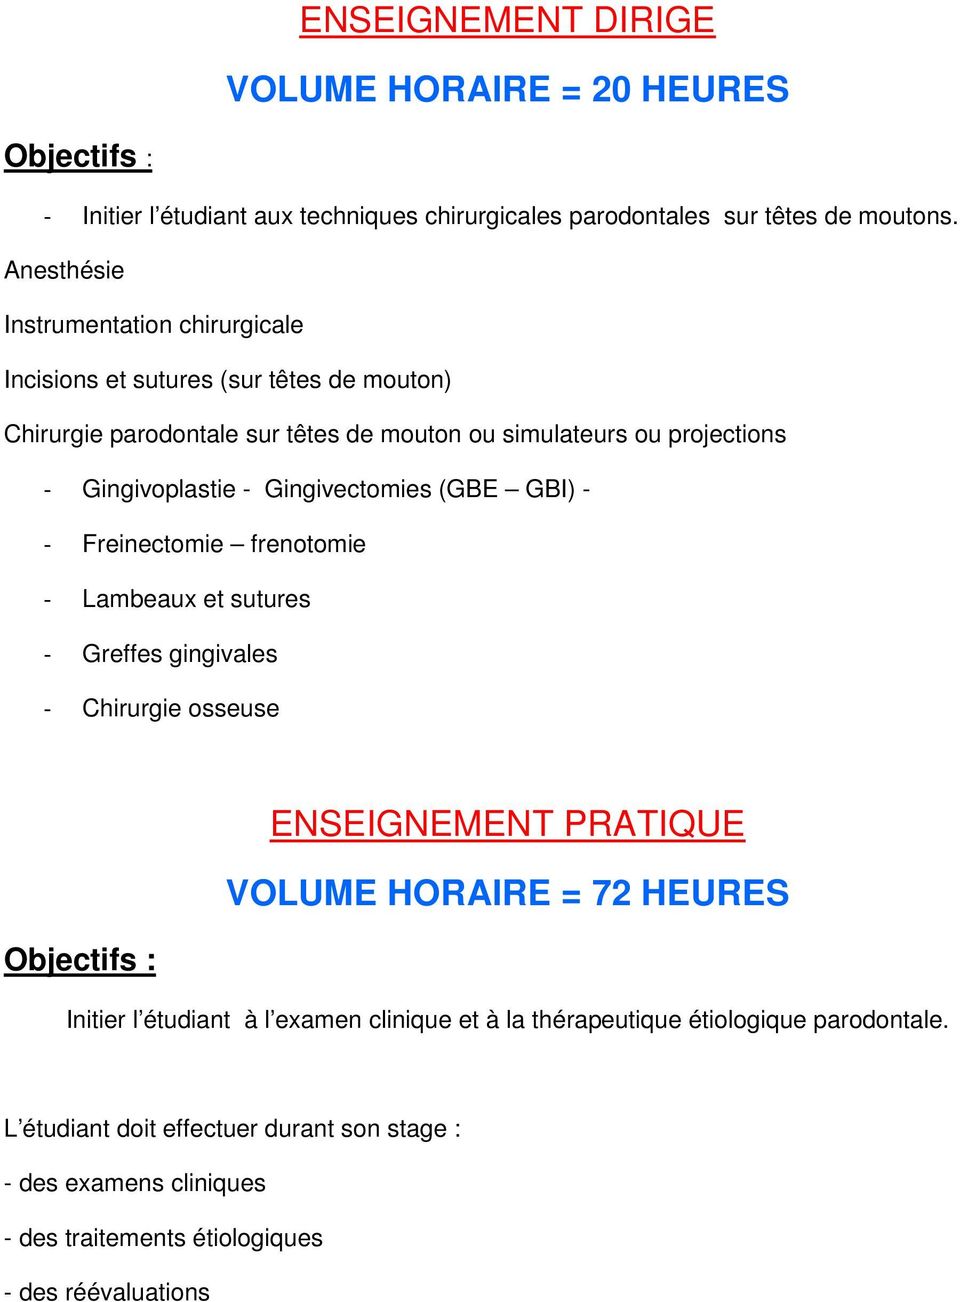 Gingivectomies (GBE GBI) - - Freinectomie frenotomie - Lambeaux et sutures - Greffes gingivales - Chirurgie osseuse ENSEIGNEMENT PRATIQUE VOLUME HORAIRE = 72 HEURES Objectifs